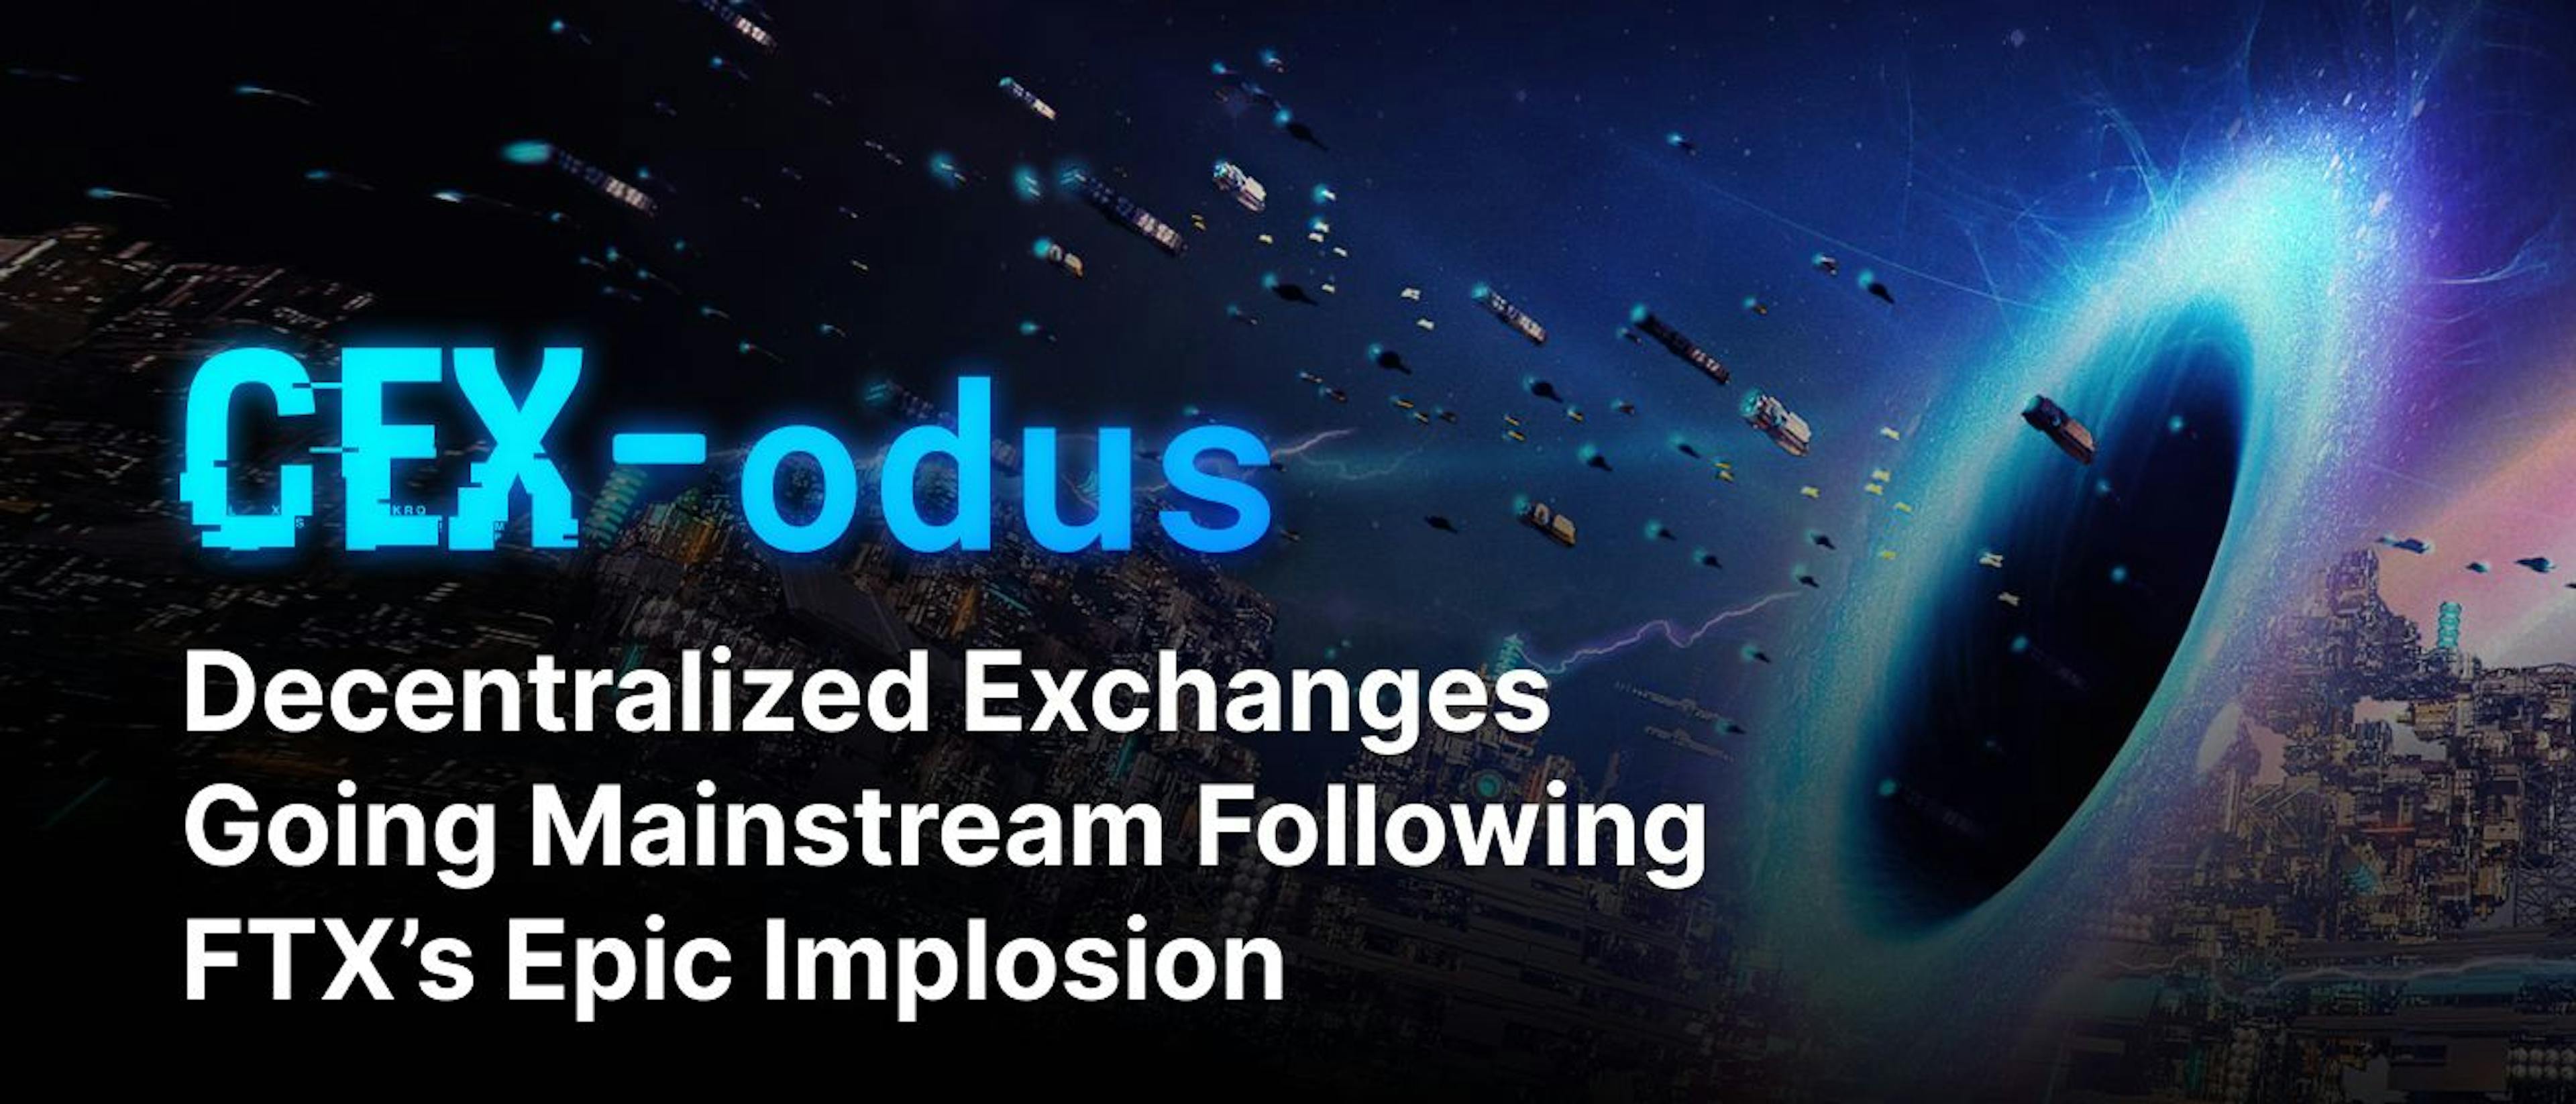 /cex-odus-decentralized-exchanges-going-mainstream-following-ftxs-epic-implosion feature image